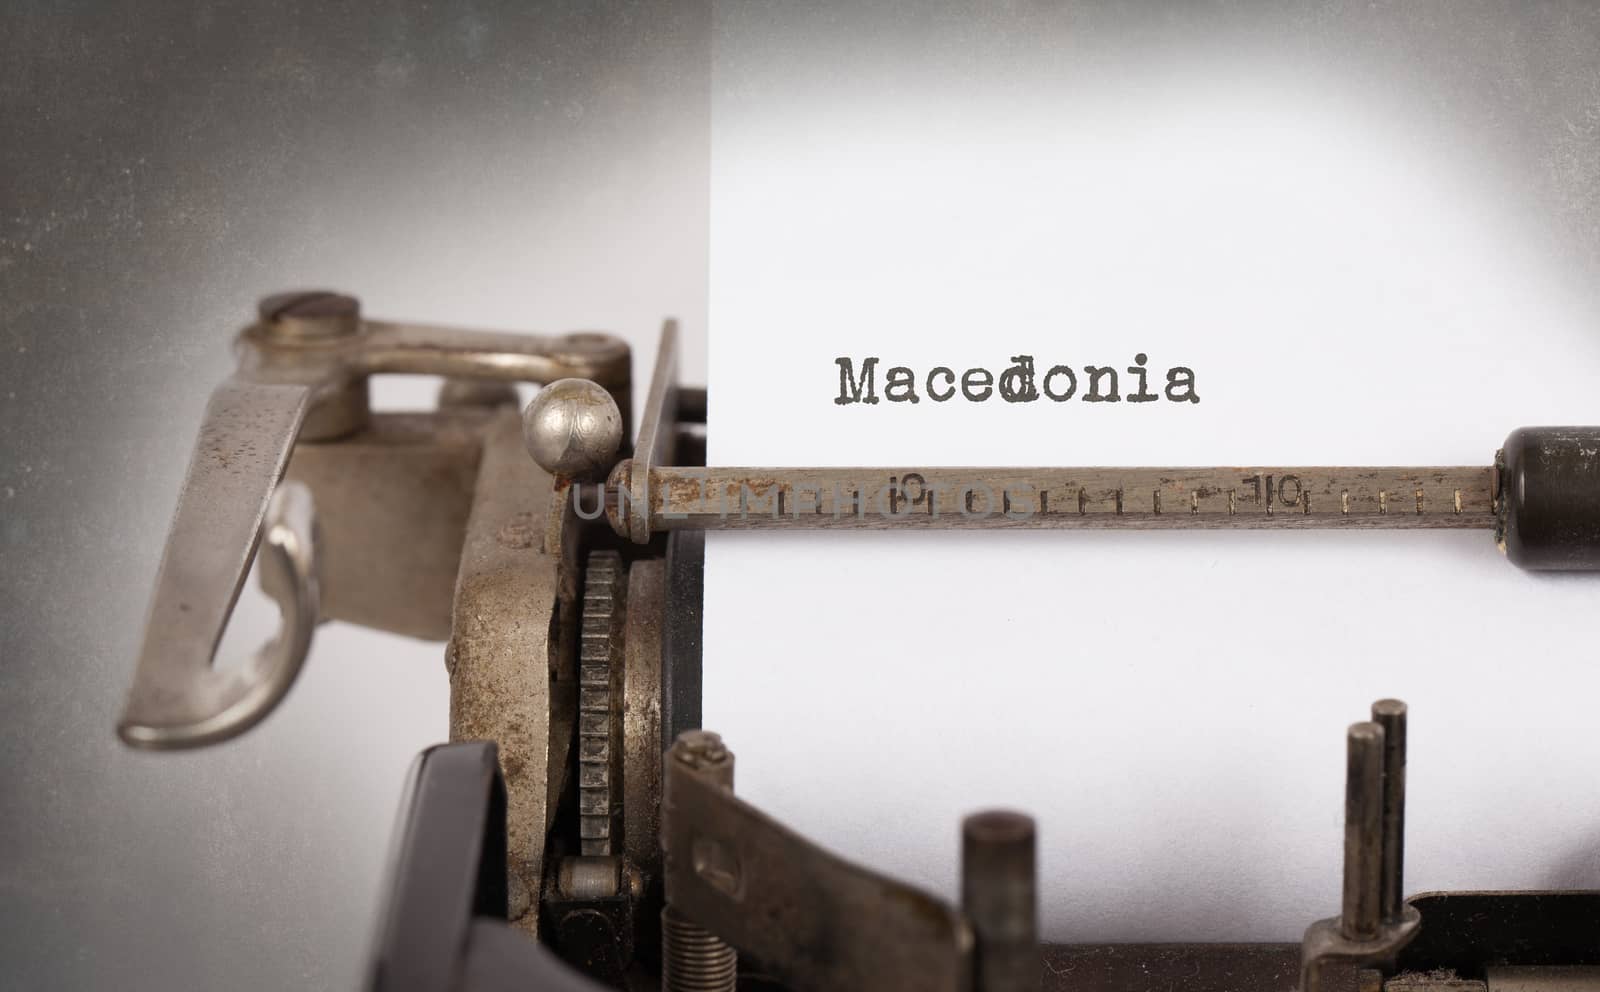 Inscription made by vintage typewriter, country, Macedonia